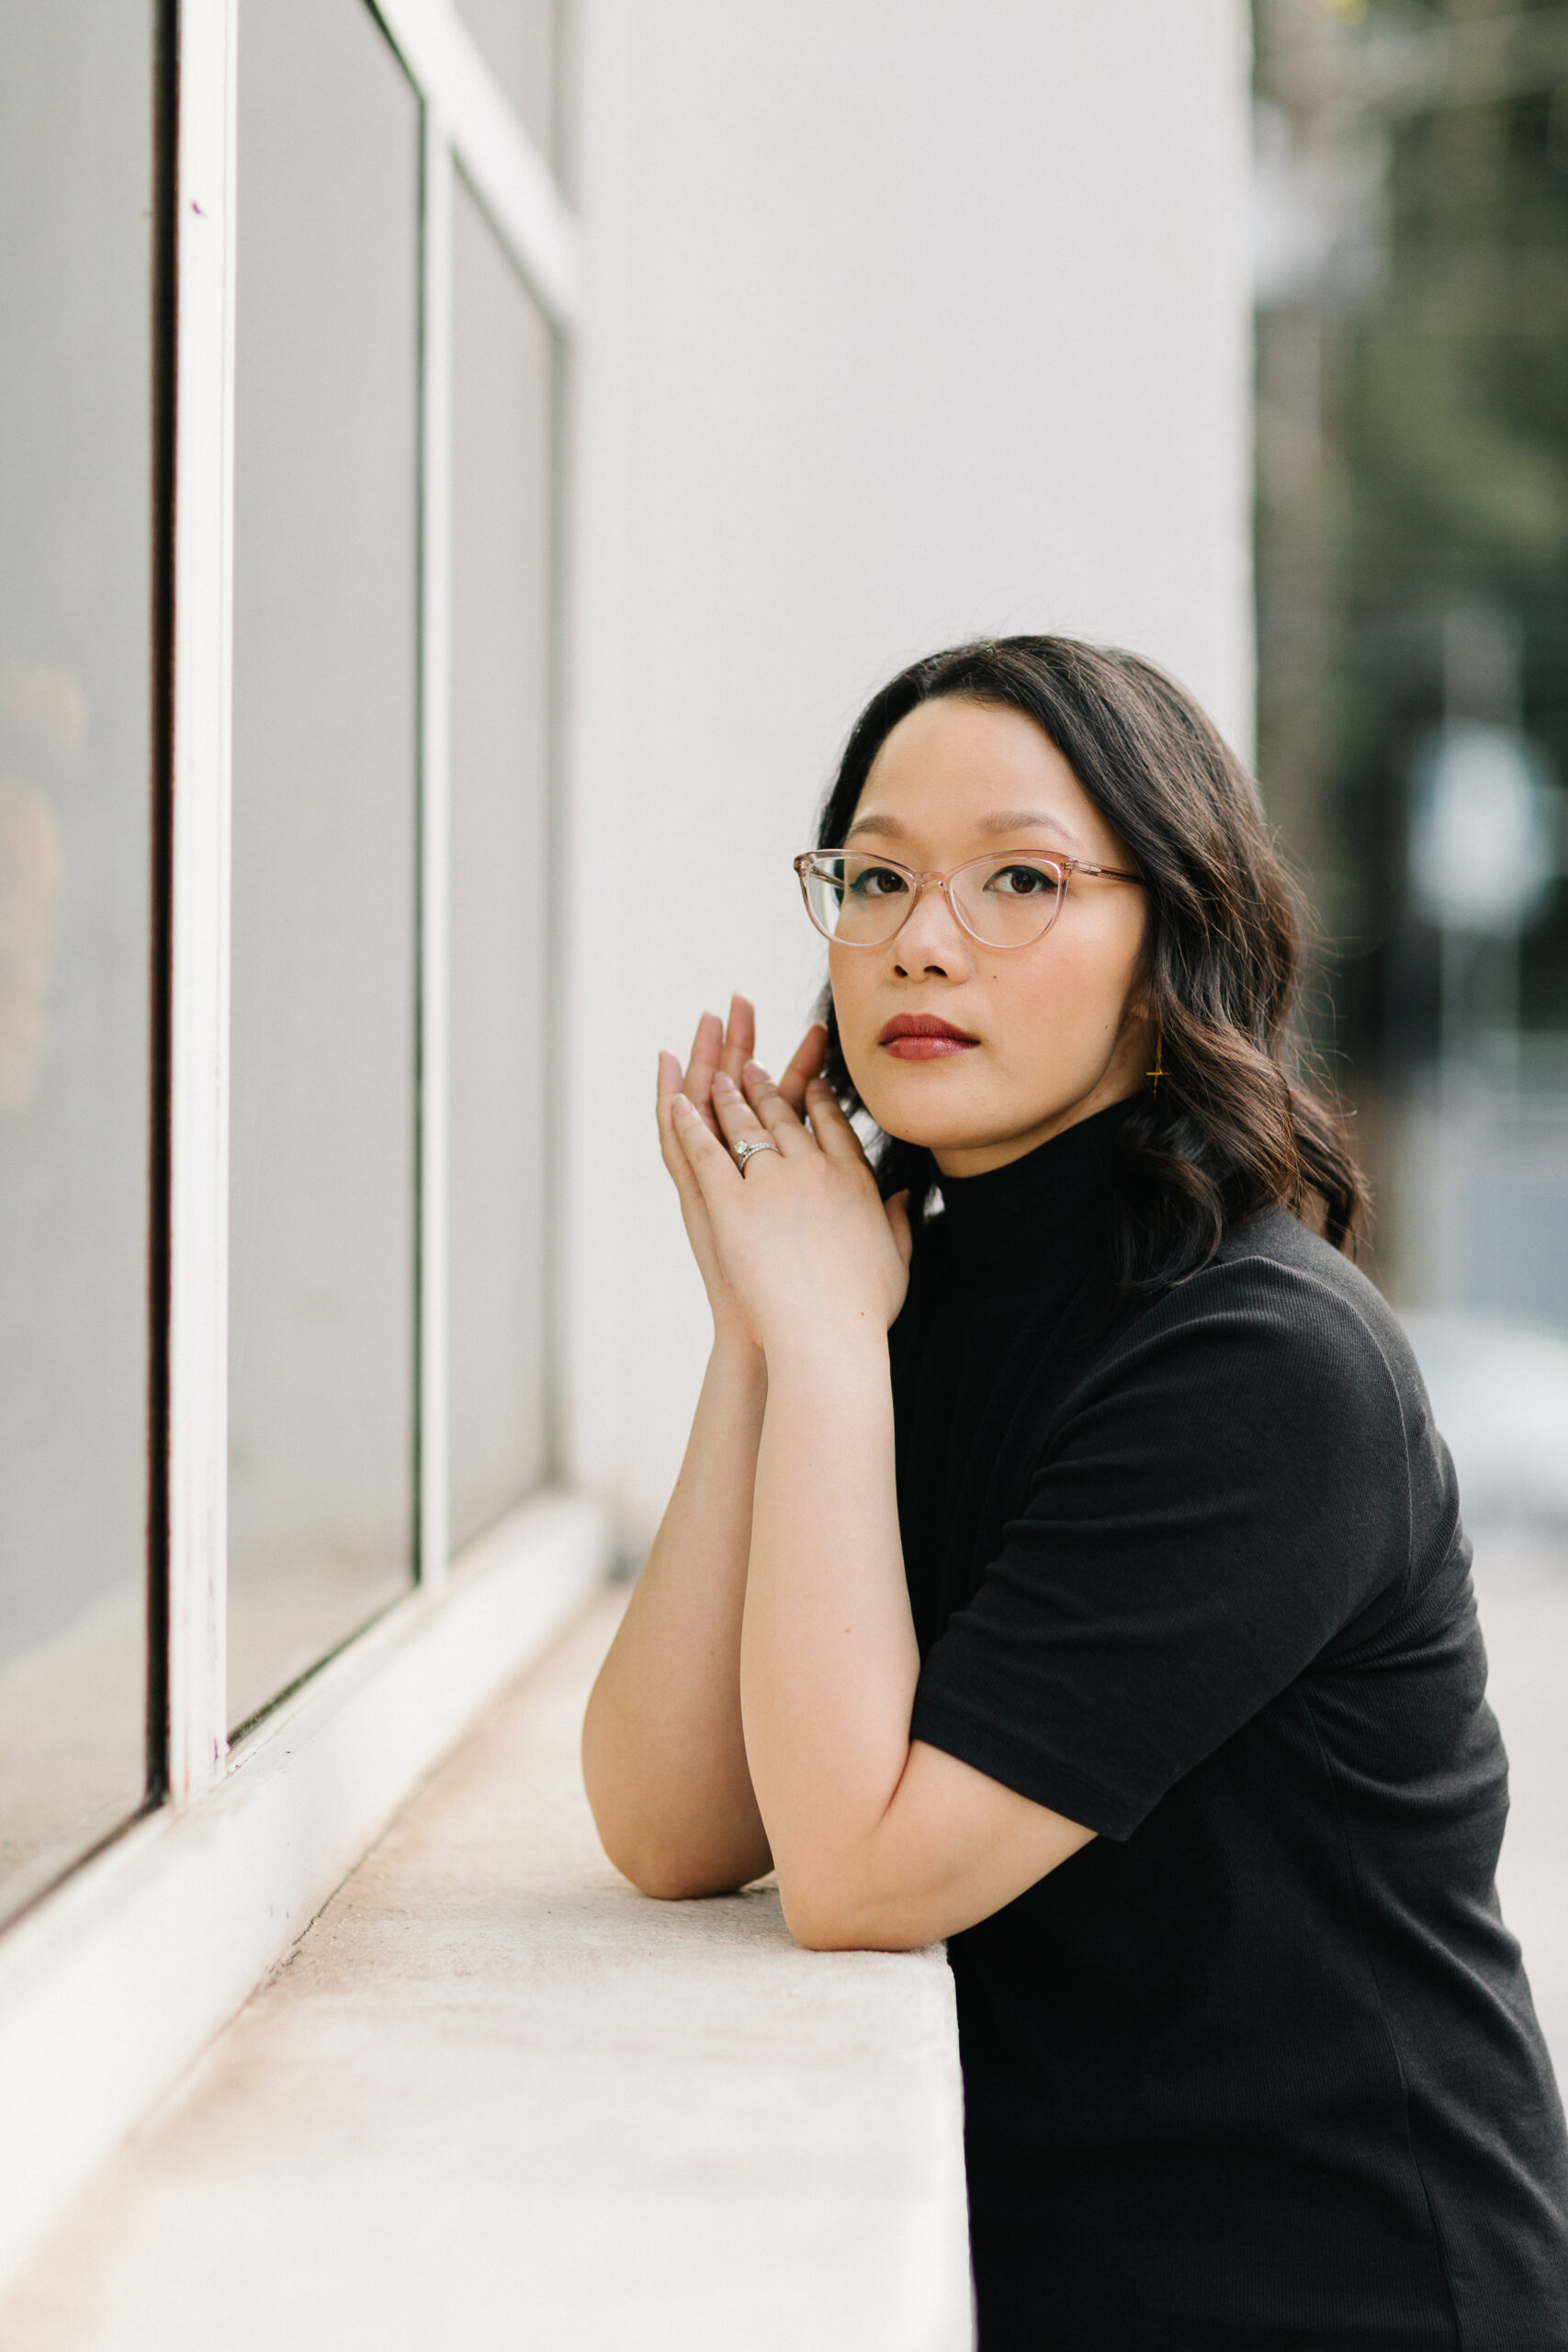 Interview with Author Trang Thanh Tran